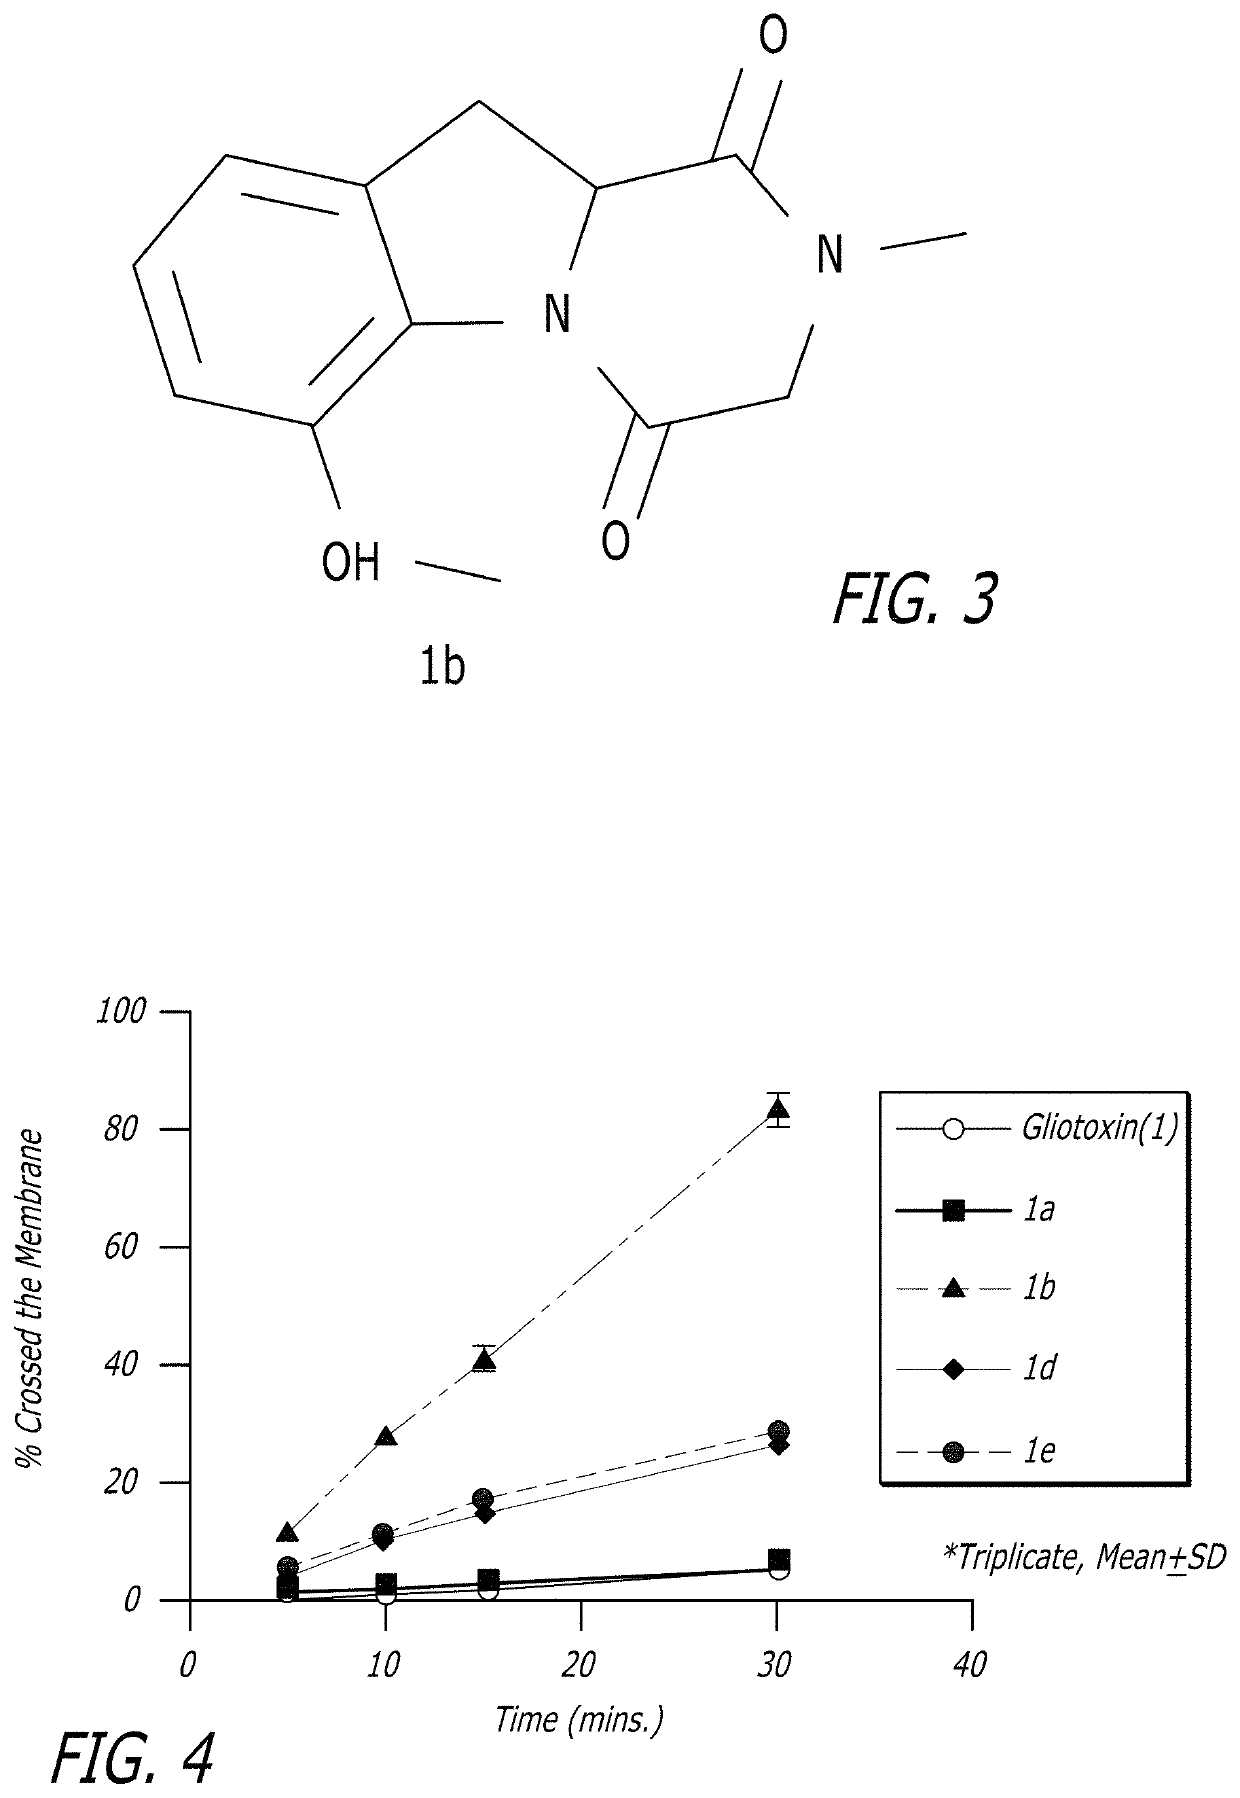 Novel opioid antagonists and methods related thereto